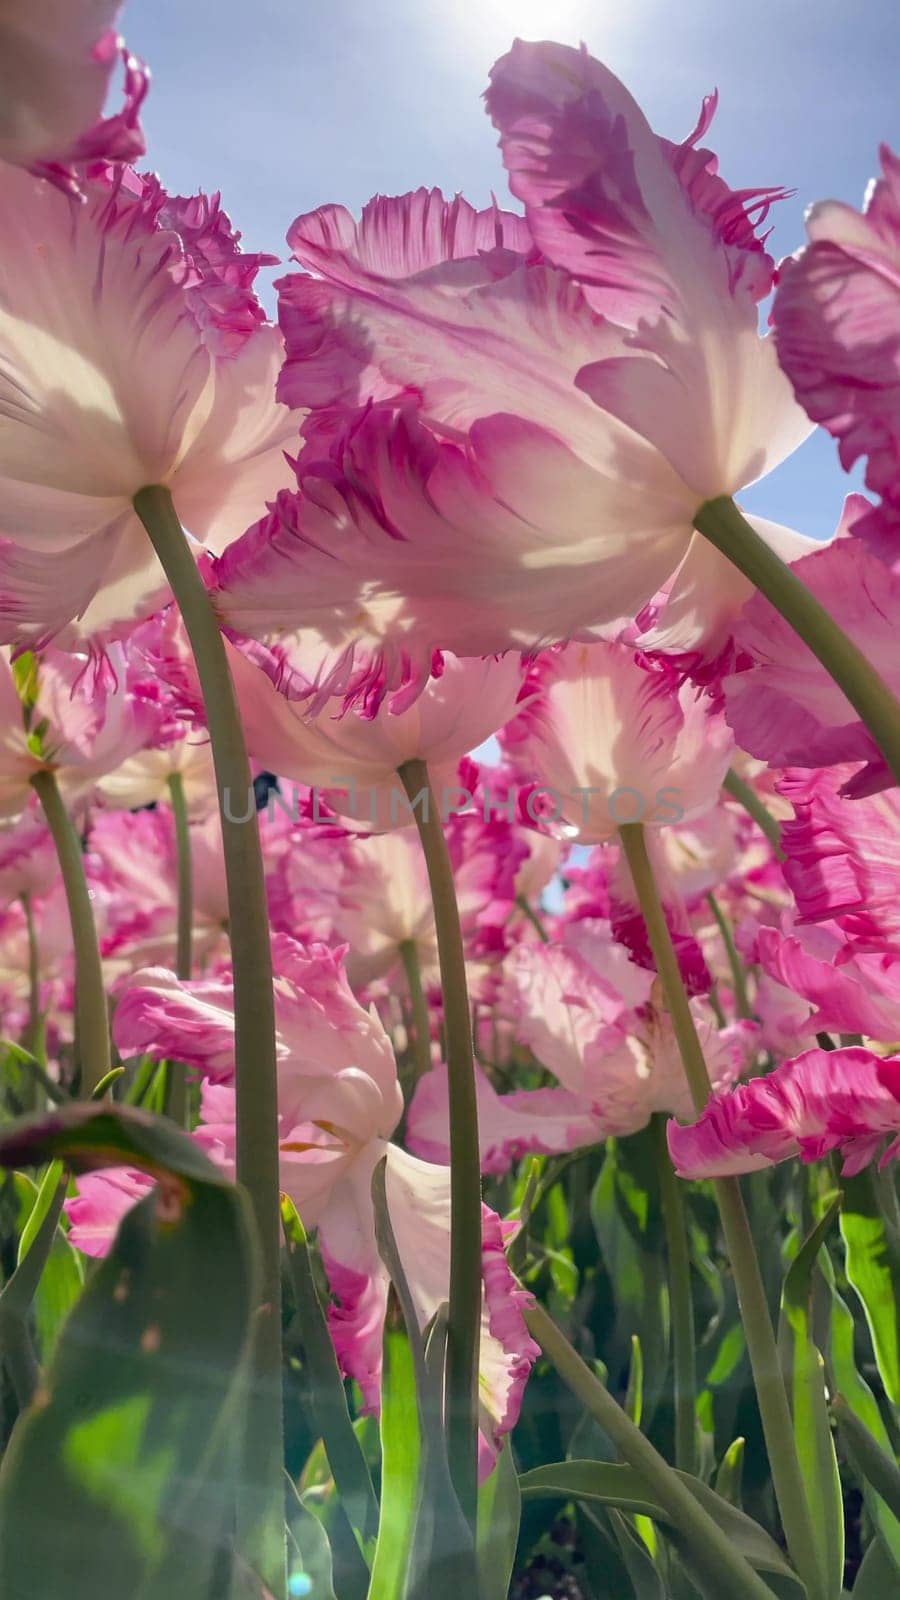 Blooming pink tulips flowerbed. in a flower garden Horizontal camera rotation